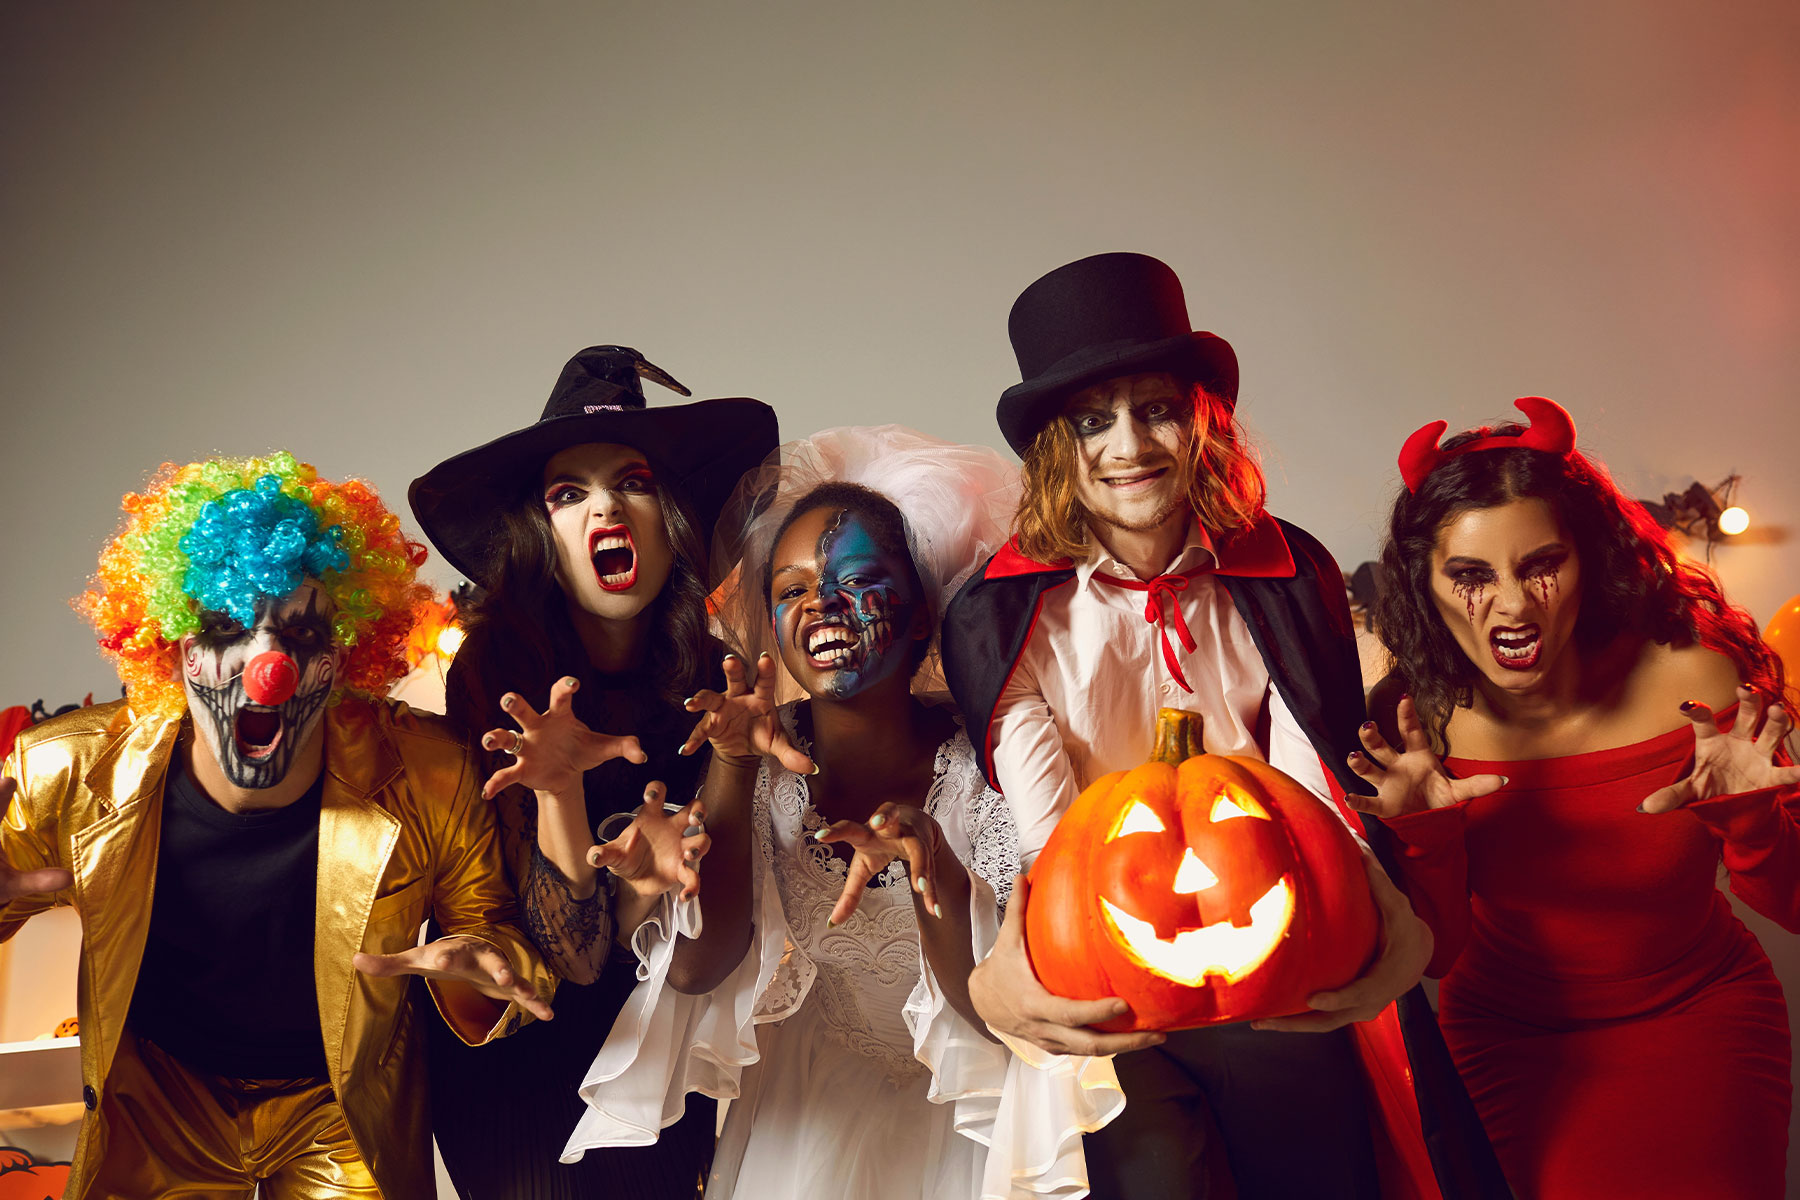 Group of young people dressed up as spooky characters having fun at Halloween costume party.